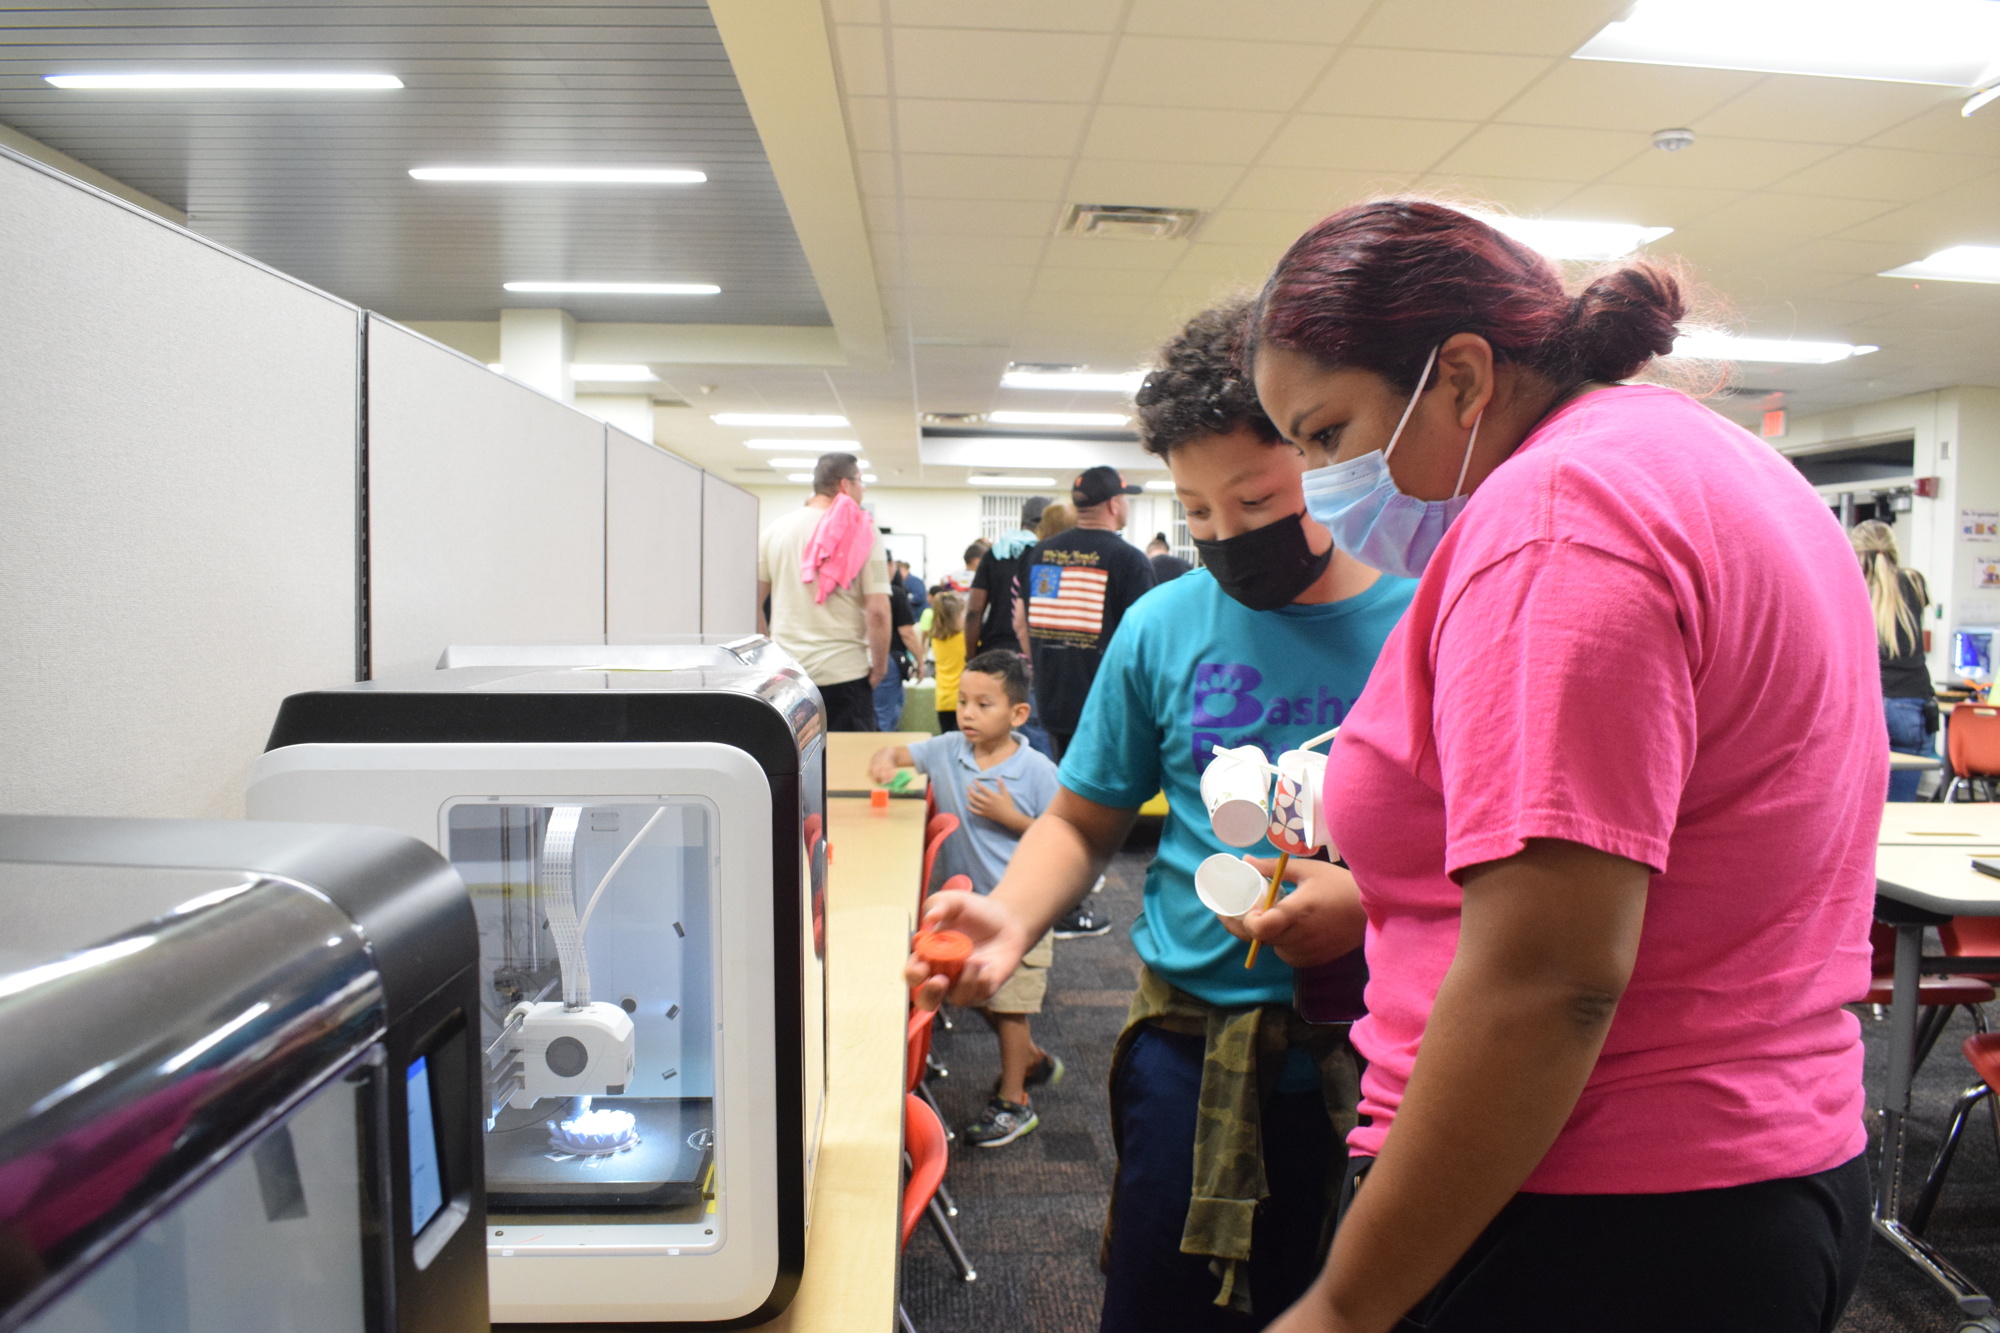 Angel Jimenez, a fifth grader, and Veronica Jimenez look at William H. Bashaw Elementary School's new 3D printers.